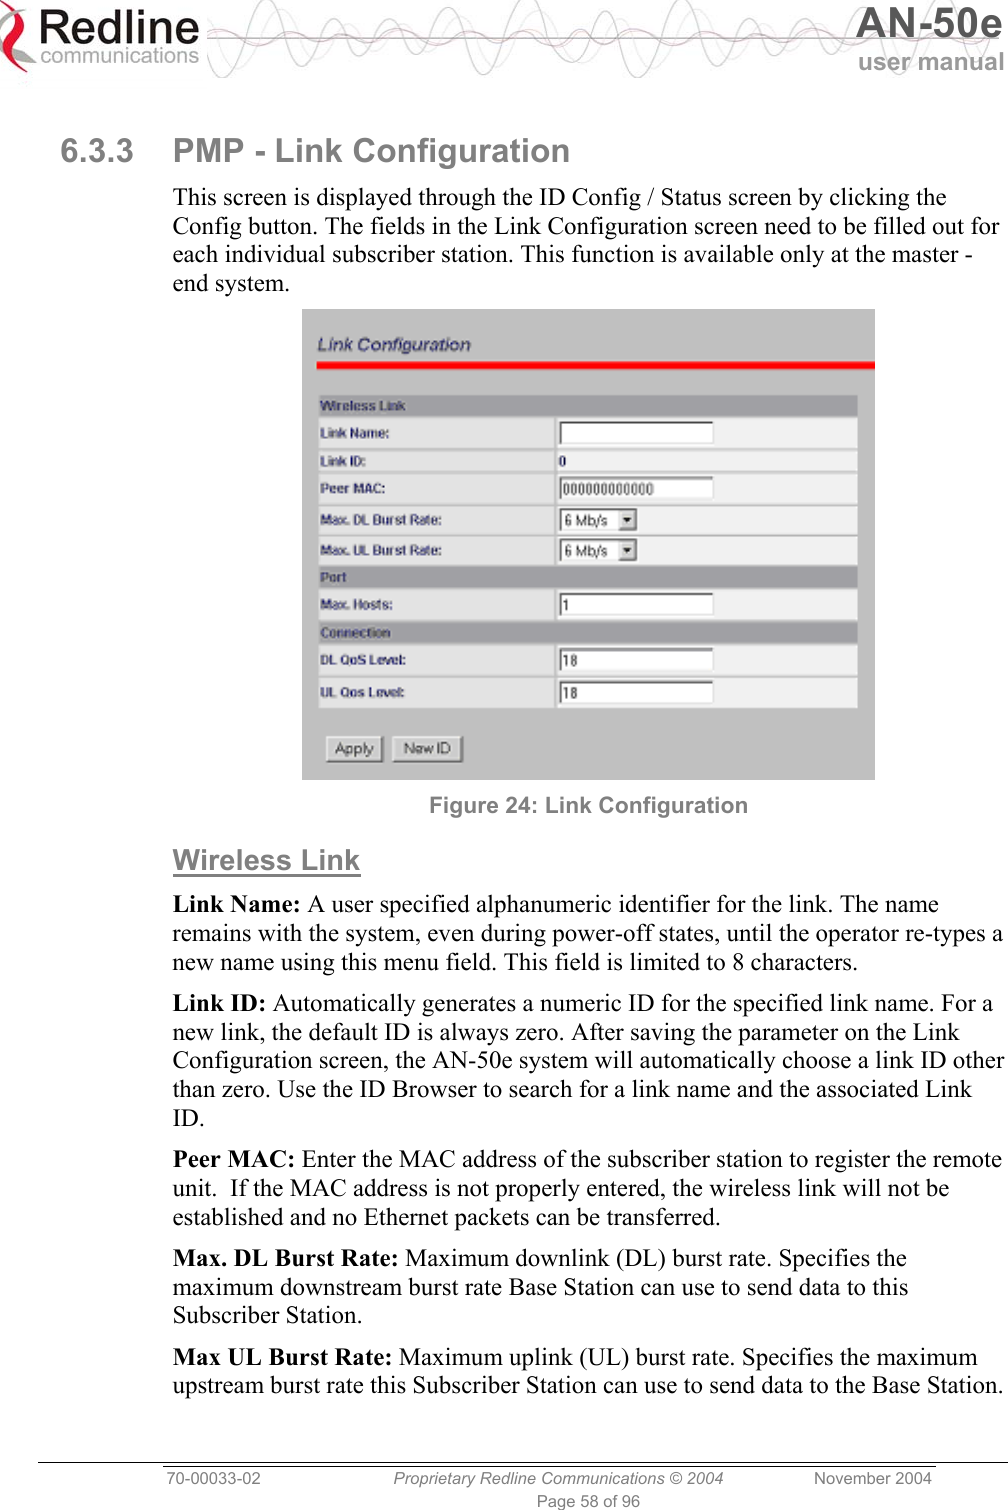   AN-50e user manual  70-00033-02  Proprietary Redline Communications © 2004 November 2004 Page 58 of 96  6.3.3  PMP - Link Configuration This screen is displayed through the ID Config / Status screen by clicking the Config button. The fields in the Link Configuration screen need to be filled out for each individual subscriber station. This function is available only at the master -end system.  Figure 24: Link Configuration Wireless Link Link Name: A user specified alphanumeric identifier for the link. The name remains with the system, even during power-off states, until the operator re-types a new name using this menu field. This field is limited to 8 characters. Link ID: Automatically generates a numeric ID for the specified link name. For a new link, the default ID is always zero. After saving the parameter on the Link Configuration screen, the AN-50e system will automatically choose a link ID other than zero. Use the ID Browser to search for a link name and the associated Link ID. Peer MAC: Enter the MAC address of the subscriber station to register the remote unit.  If the MAC address is not properly entered, the wireless link will not be established and no Ethernet packets can be transferred.  Max. DL Burst Rate: Maximum downlink (DL) burst rate. Specifies the maximum downstream burst rate Base Station can use to send data to this Subscriber Station. Max UL Burst Rate: Maximum uplink (UL) burst rate. Specifies the maximum upstream burst rate this Subscriber Station can use to send data to the Base Station.  